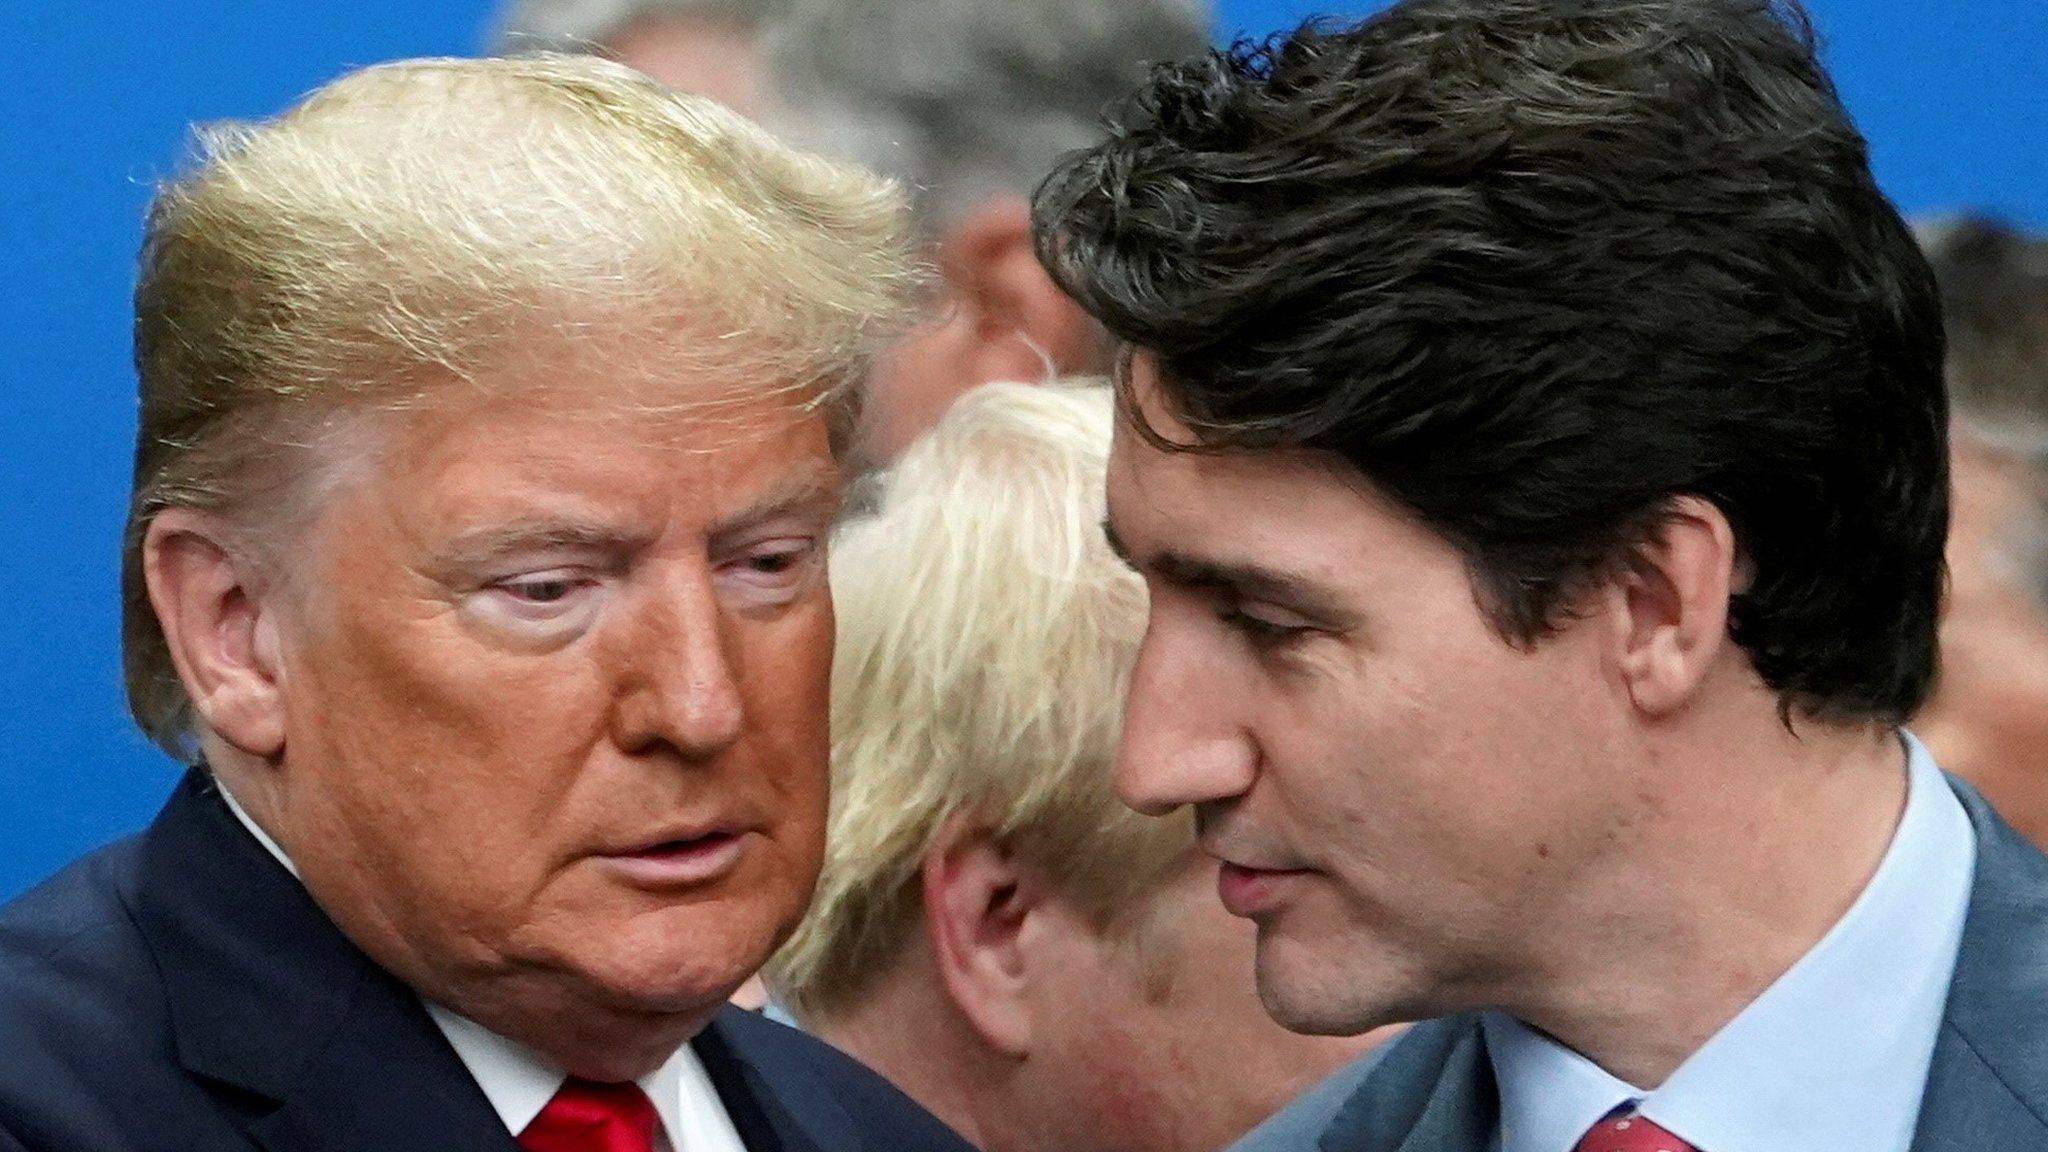 Trump and Trudeau at Nato summit in Watford